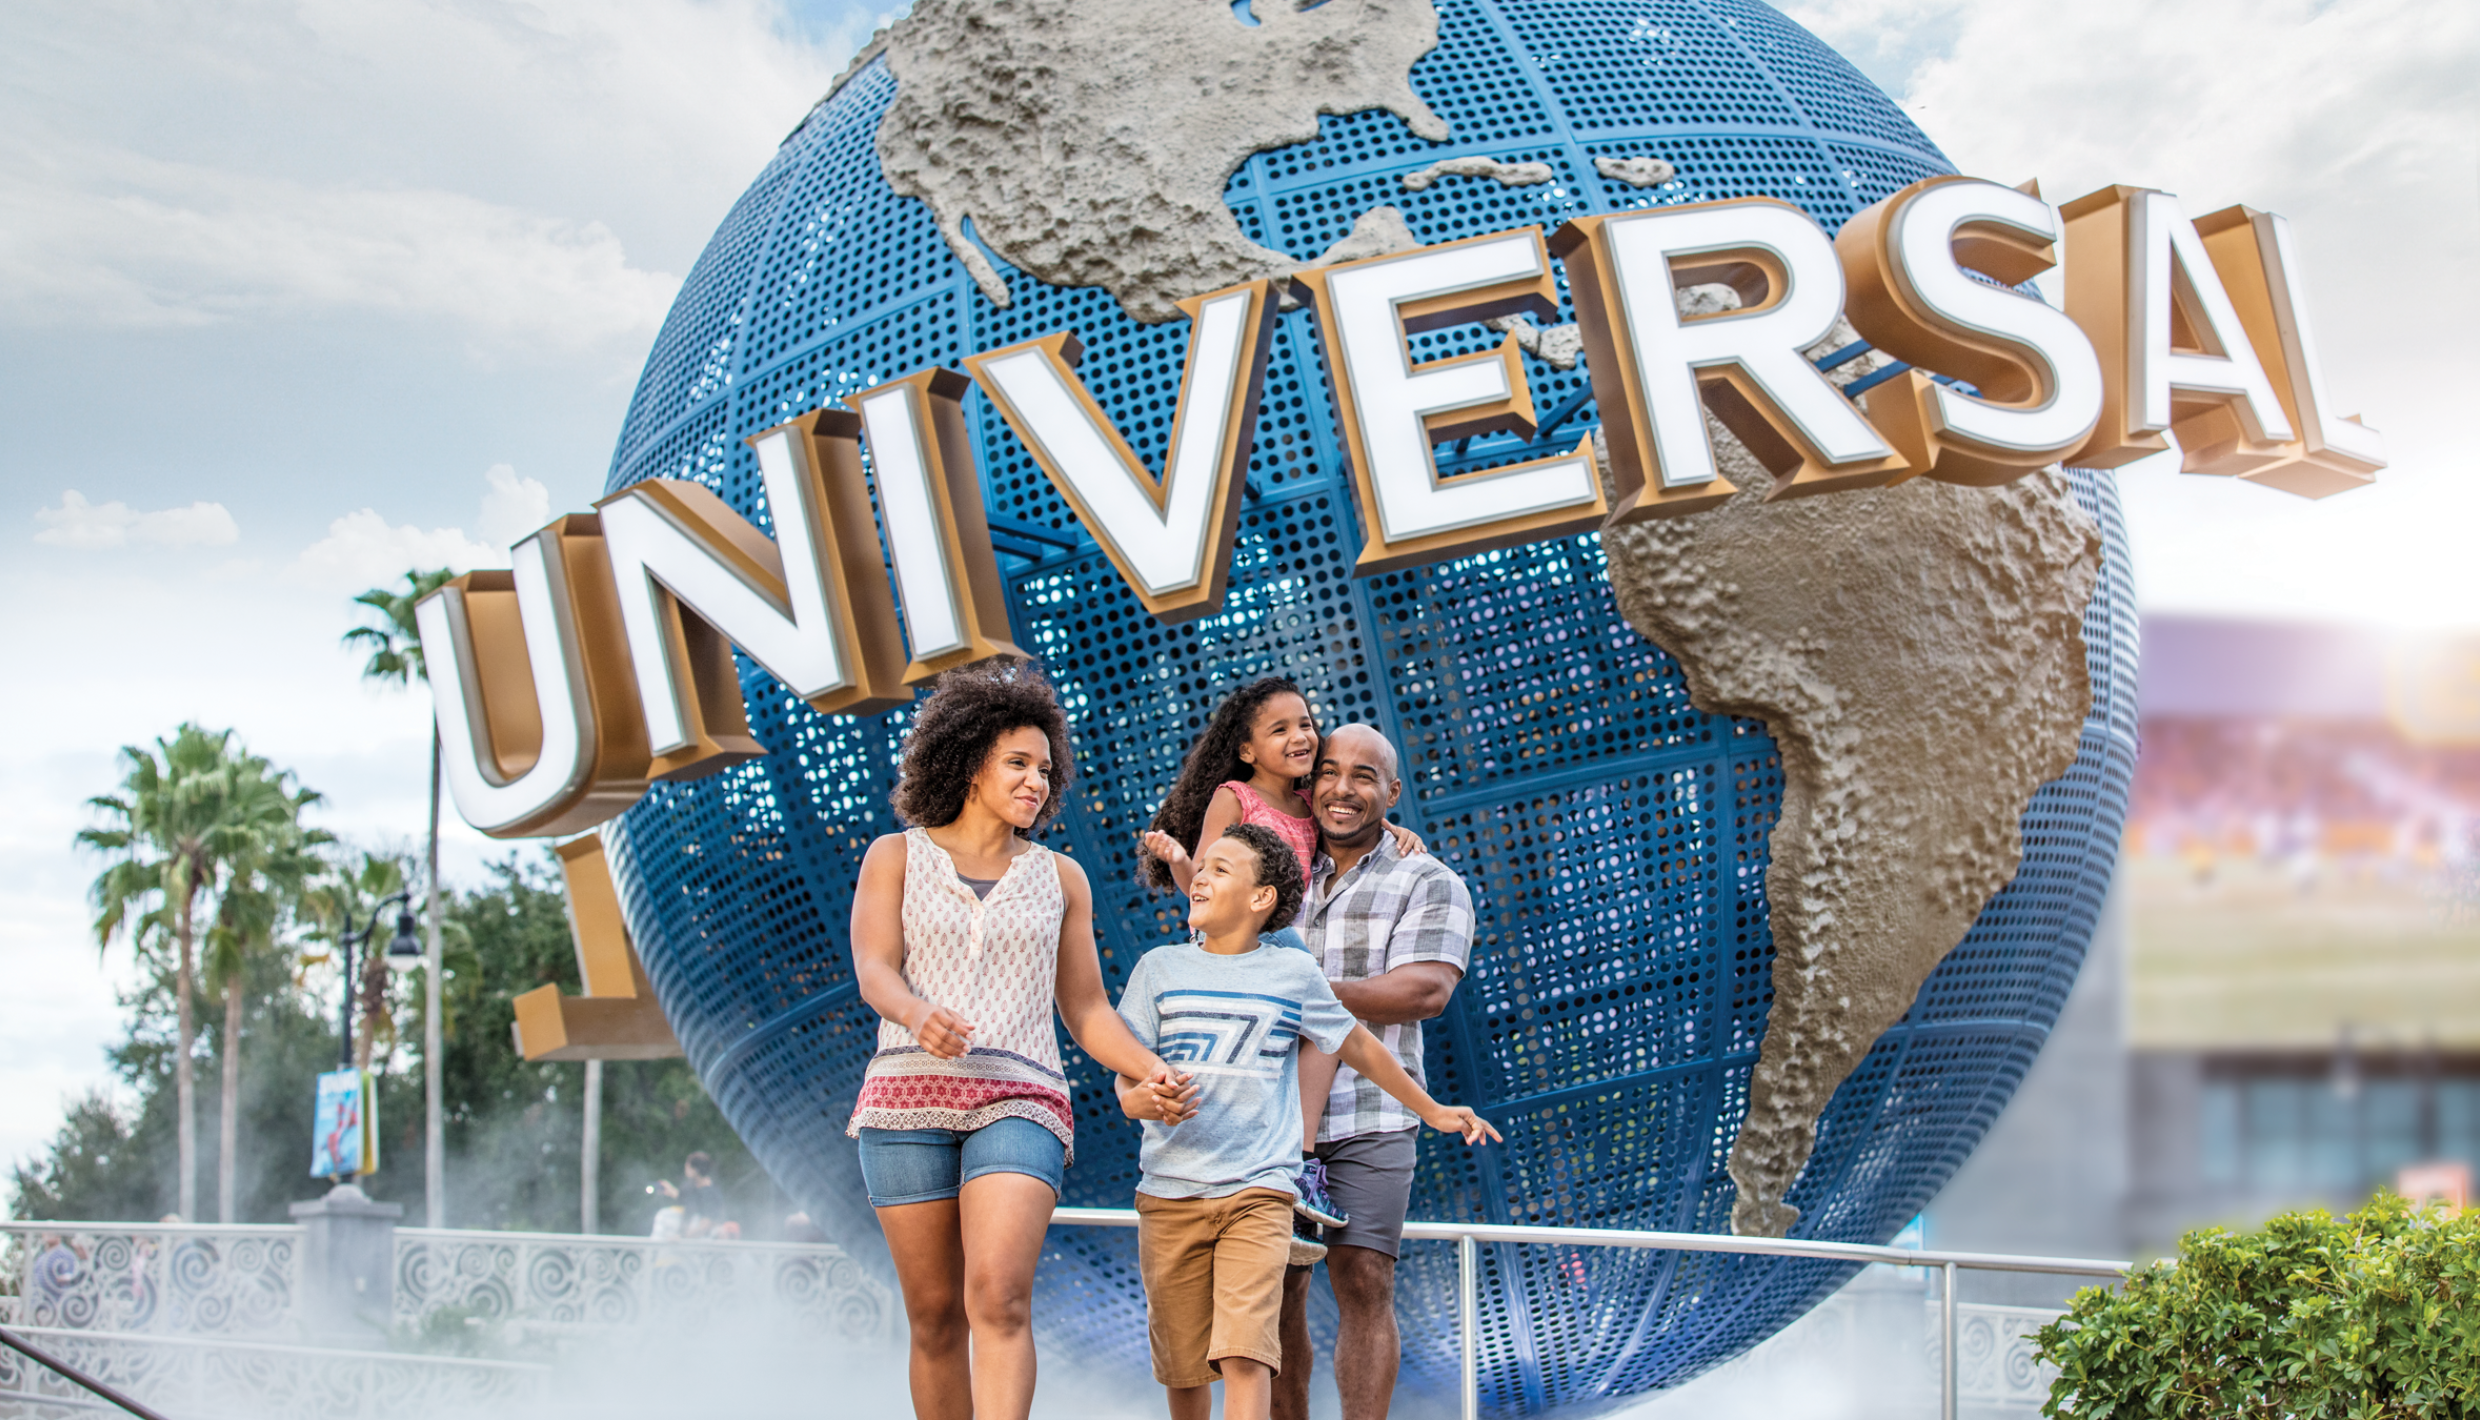 Parking Information for Universal Orlando Events